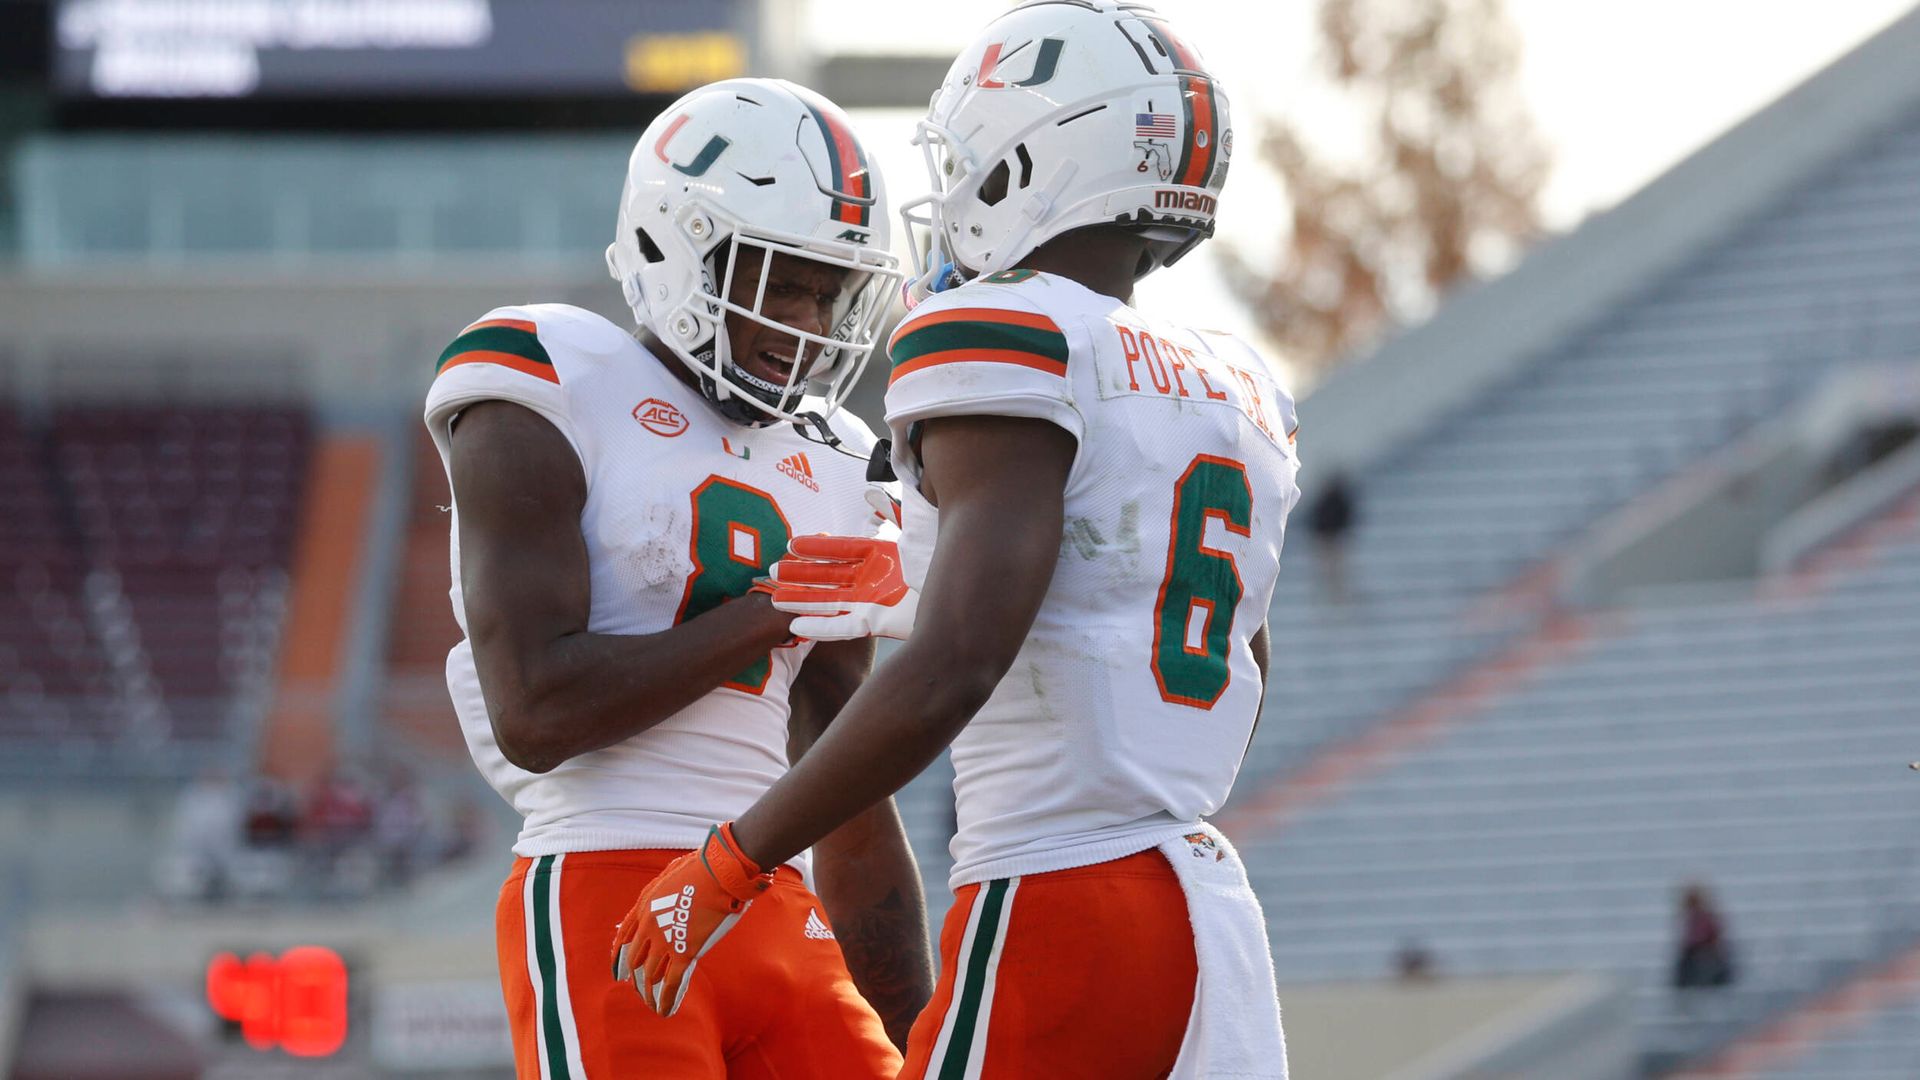 Hurricanes Hold Steady at No. 9 in Coaches' Poll